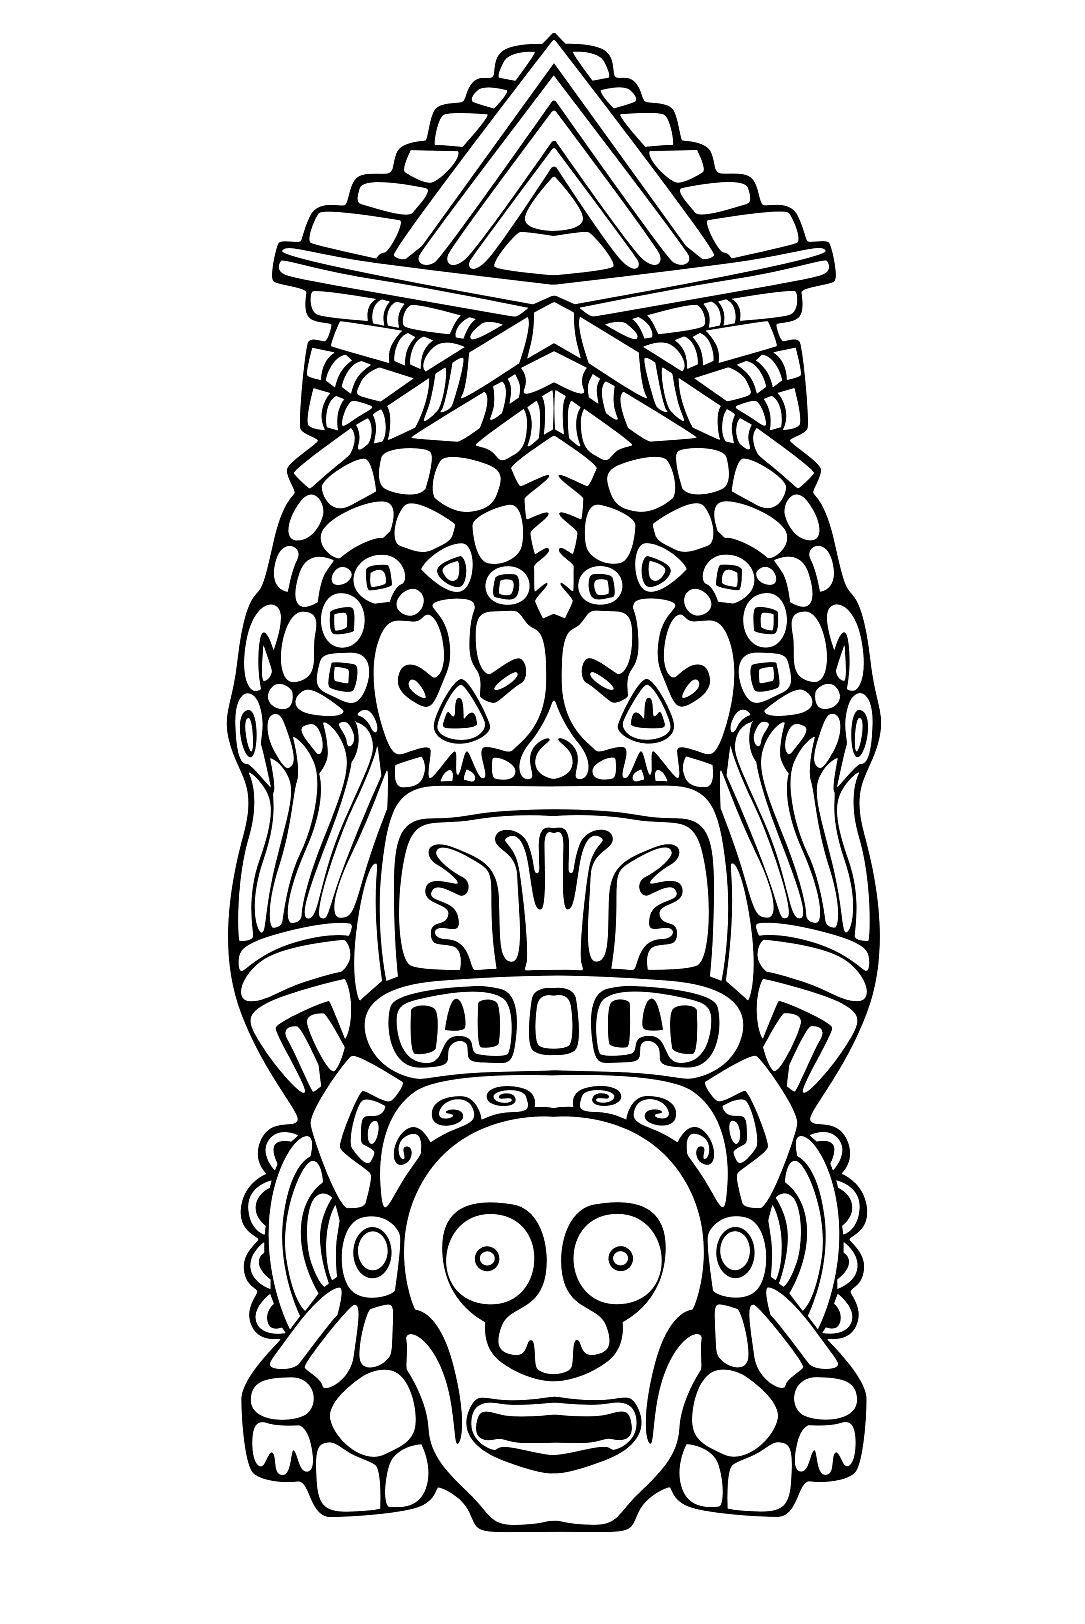 Totem inspired by Aztecs, Artist : Rocich   Source : 123rf